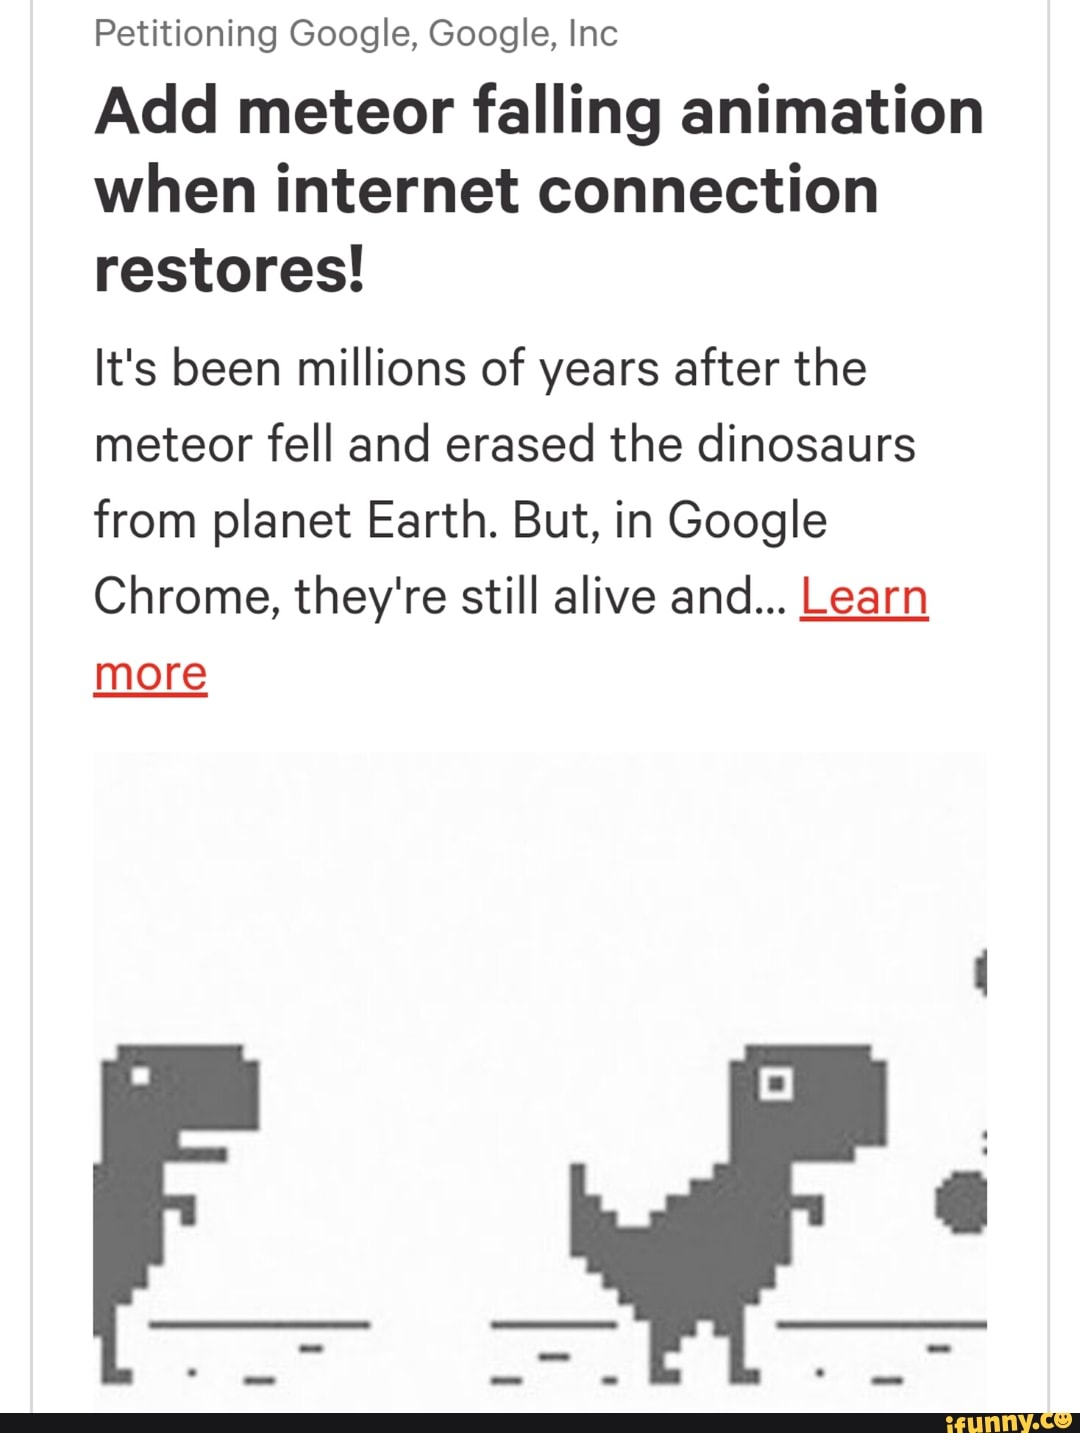 Petition · Add meteor animation to the chrome's dino game when it connects  to the internet. ·